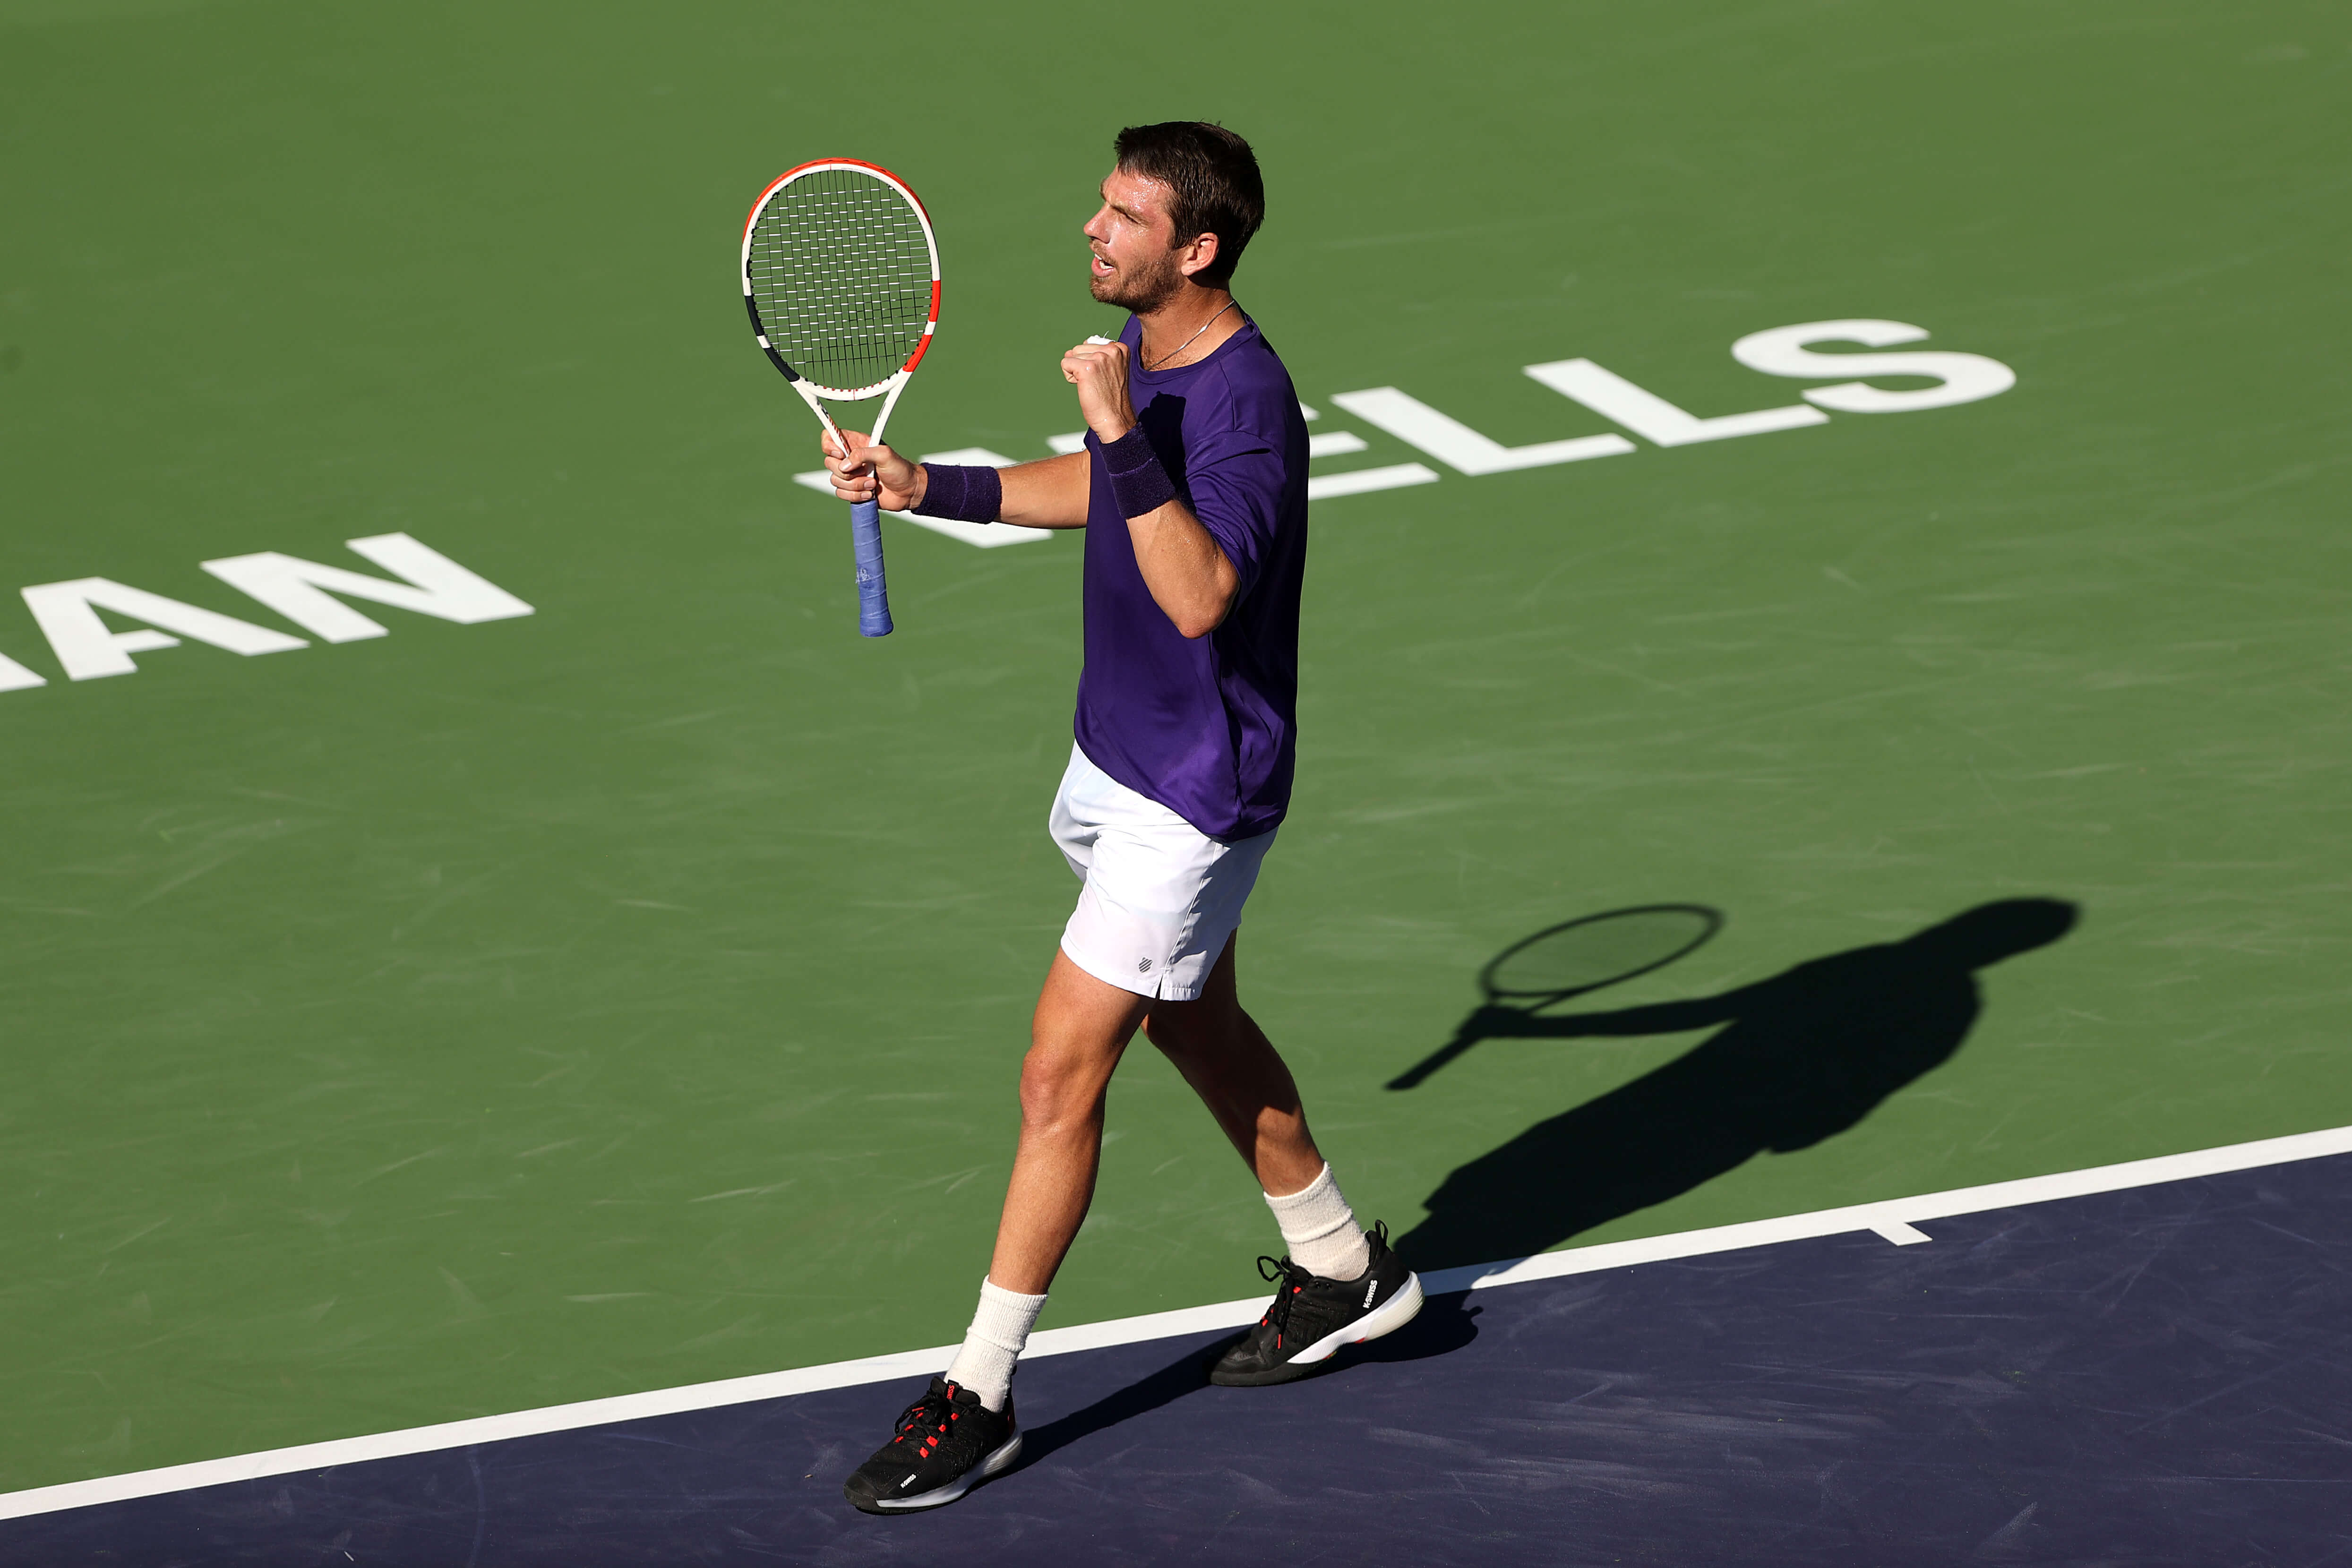 BNP Paribas Open, Indian Wells 2022 How to watch, UK TV times, live stream, schedule, and location